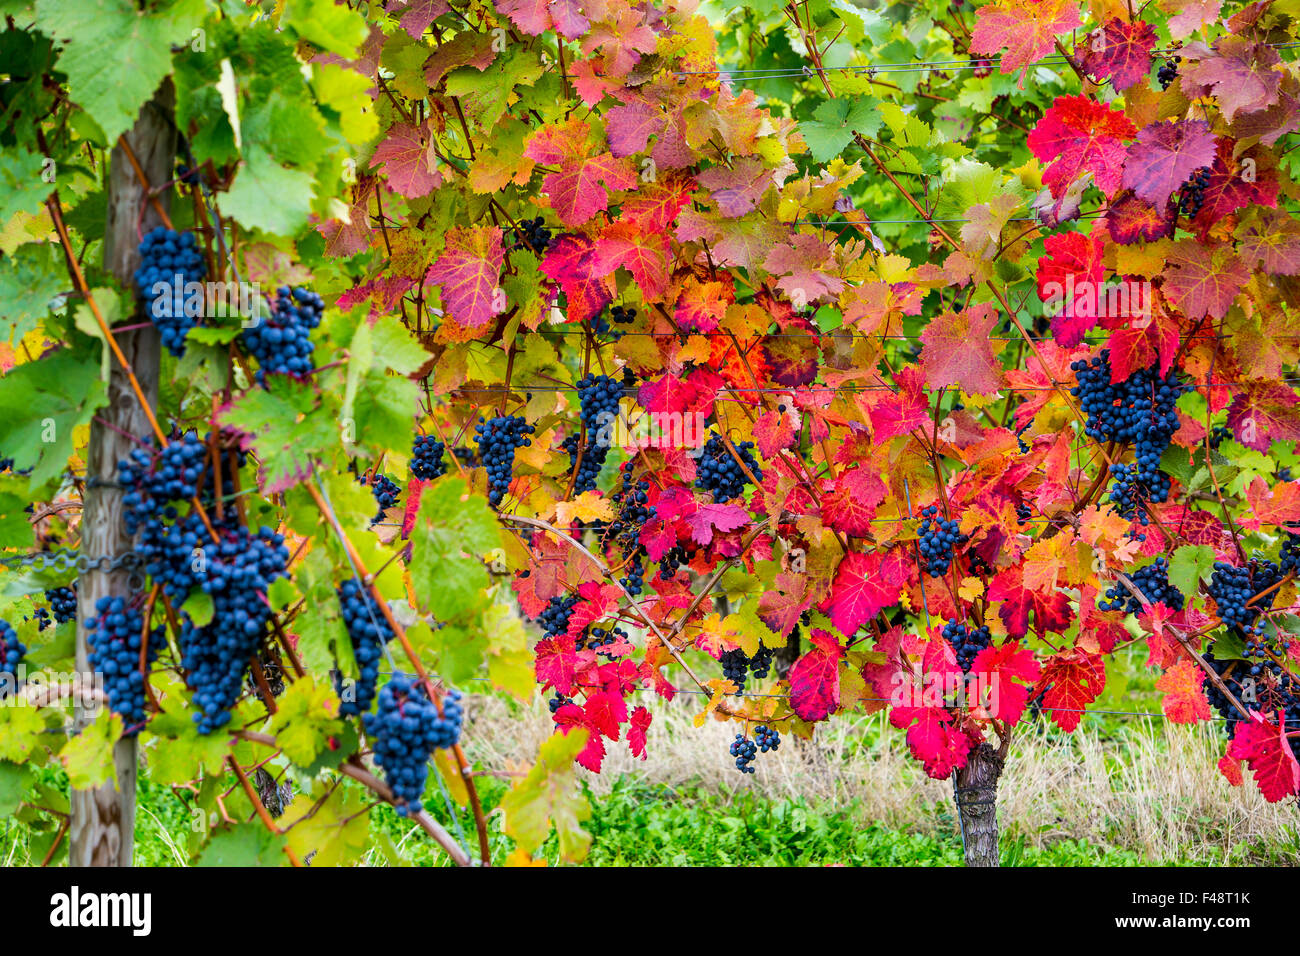 Fall,%20grapes%20in%20a%20vineyard,%20ripe,%20before%20harvest,%20Bacharach,%20Rhine%20valley,%20%20Germany%20Stock%20Photo%20-%20Alamy